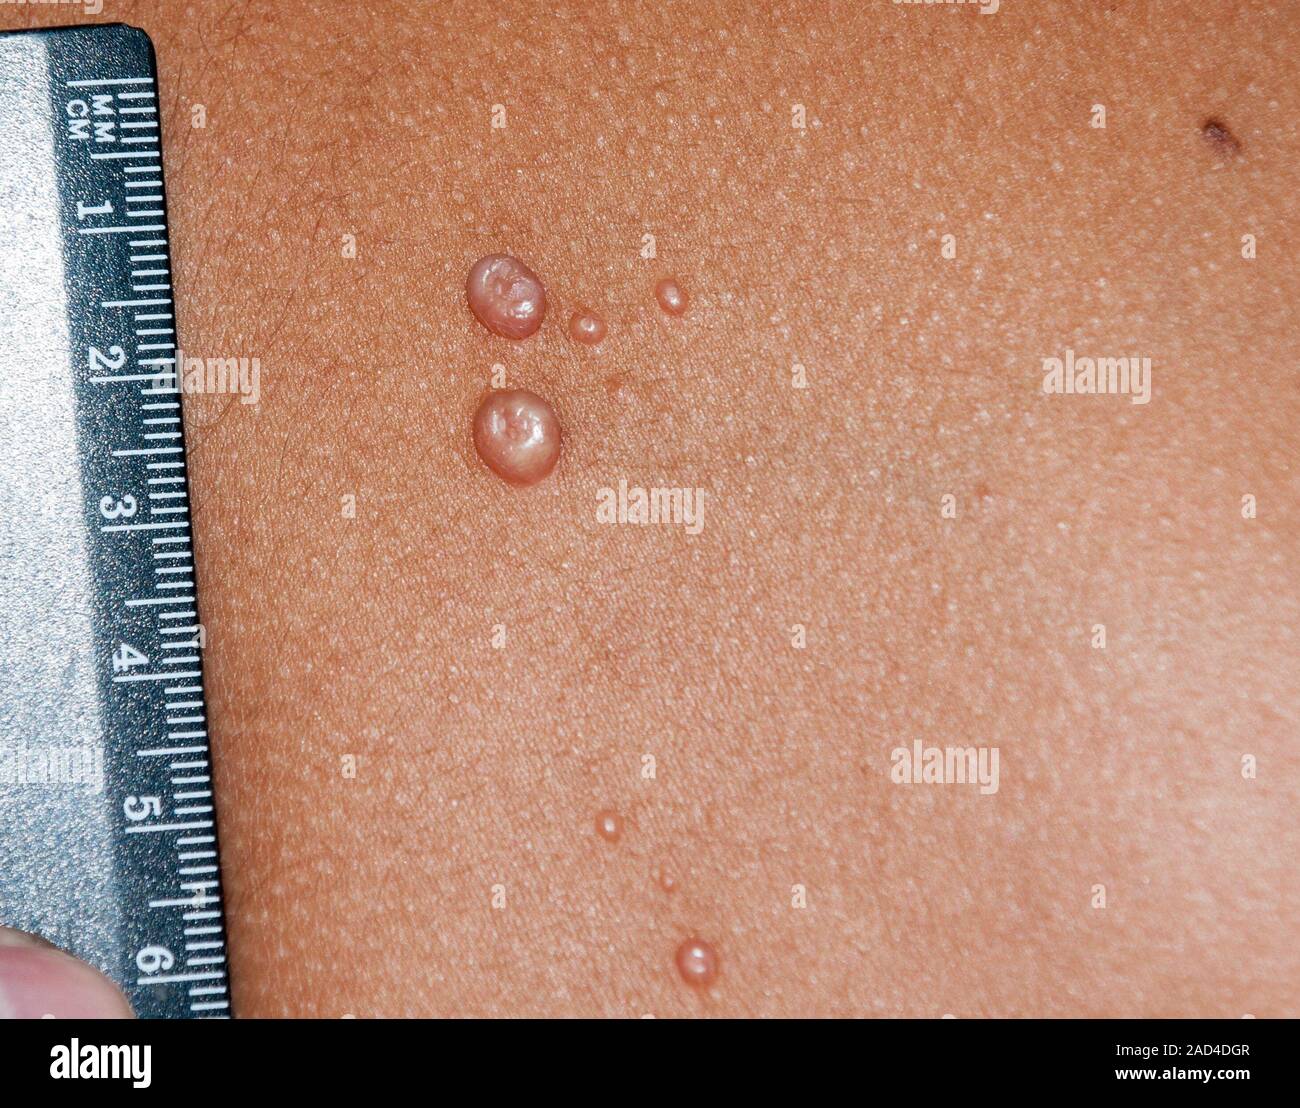 Molluscum Contagiosum Papules On The Skin Of An 8 Year Old Boy This